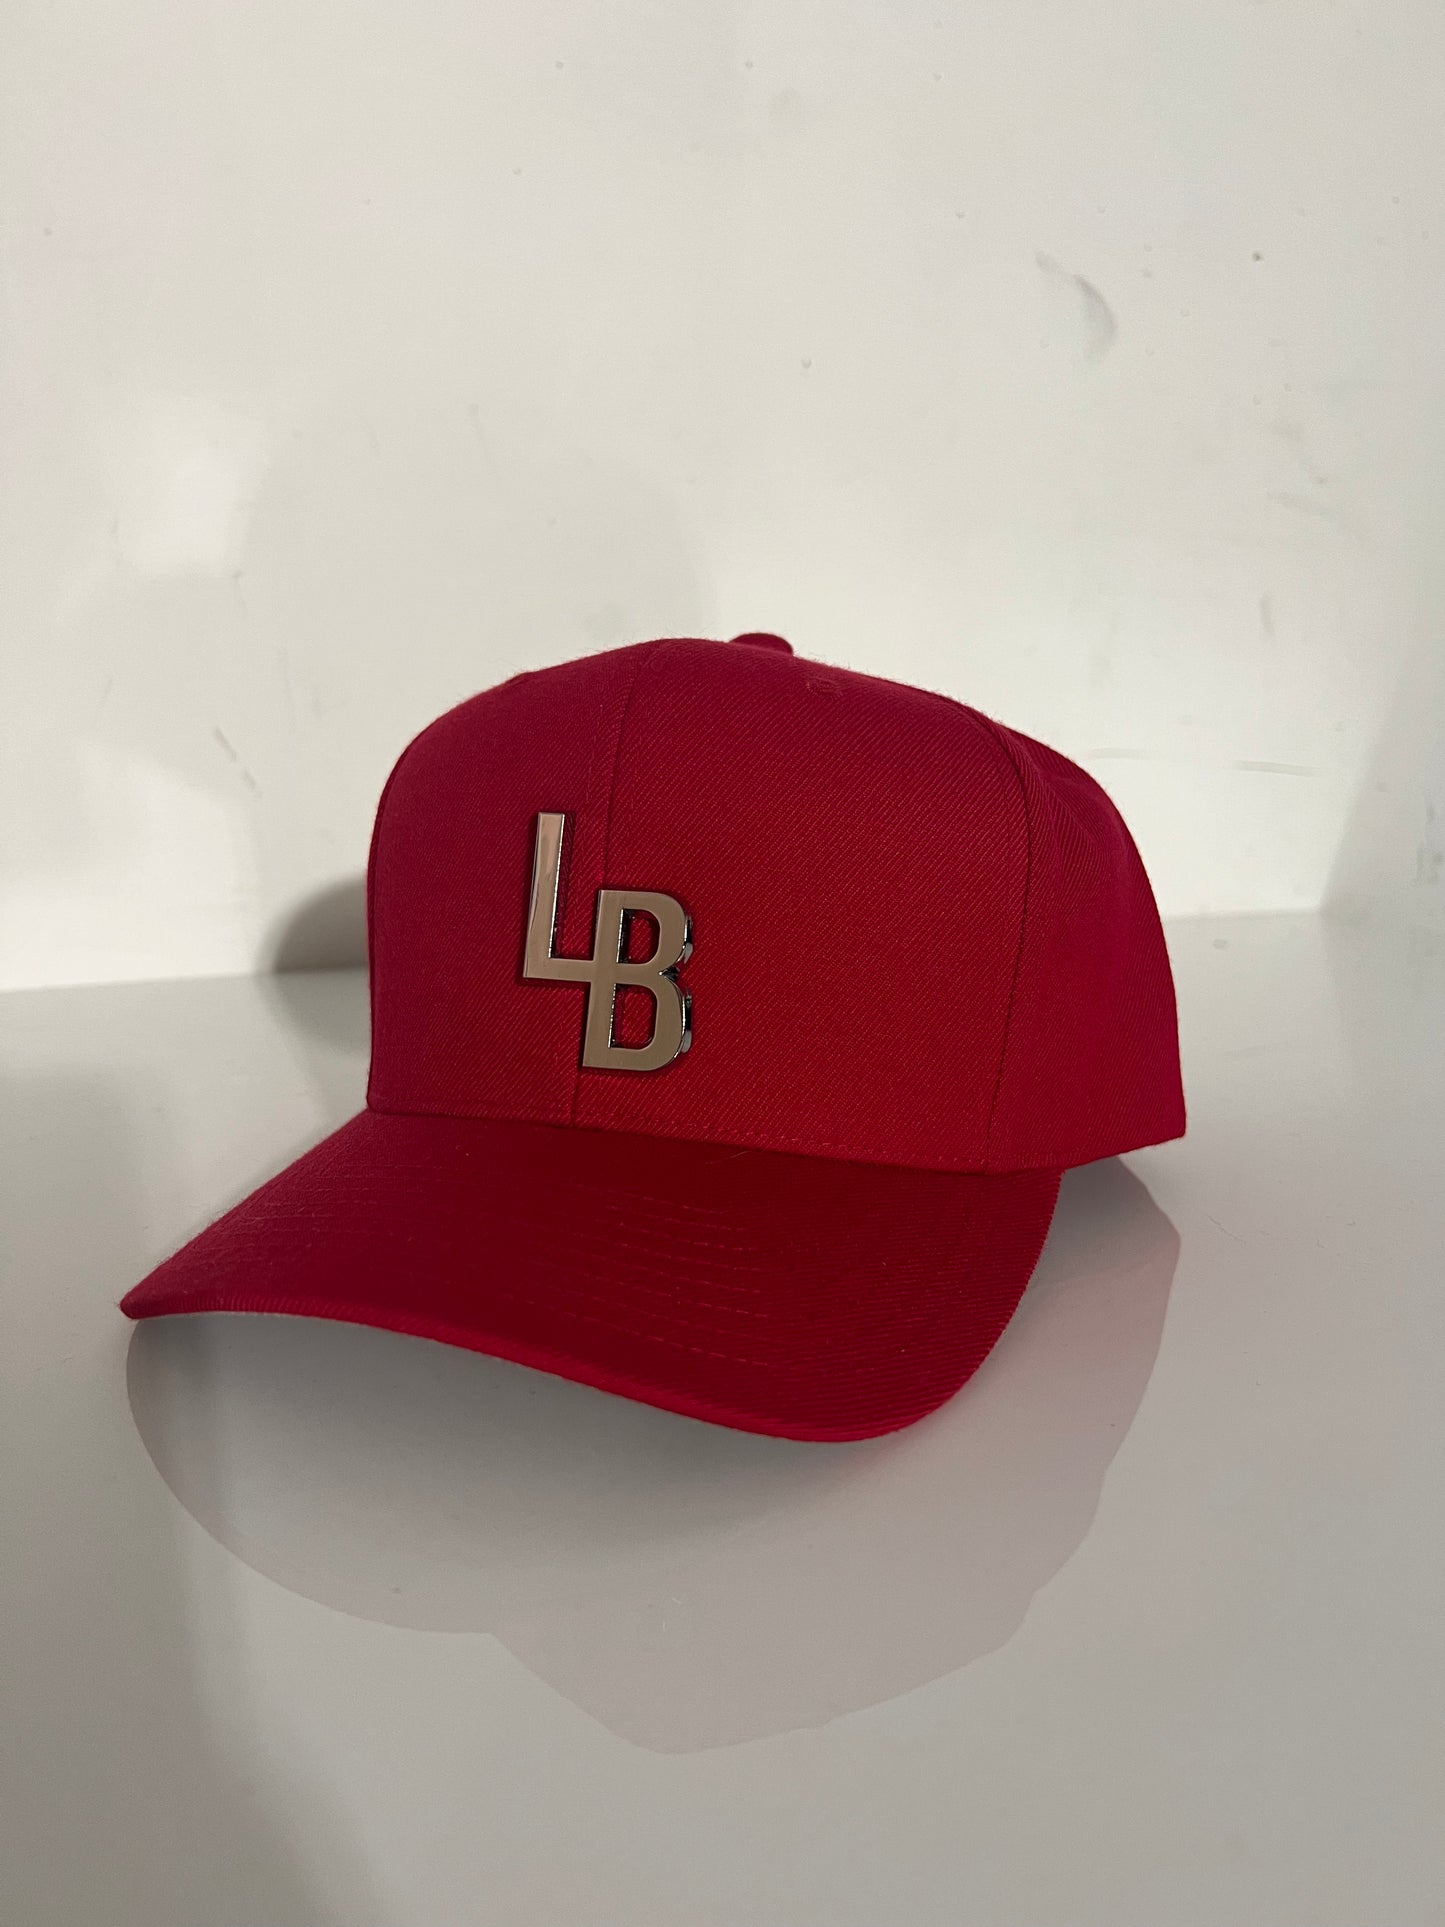 LB CHOME / RED SNAP BACK